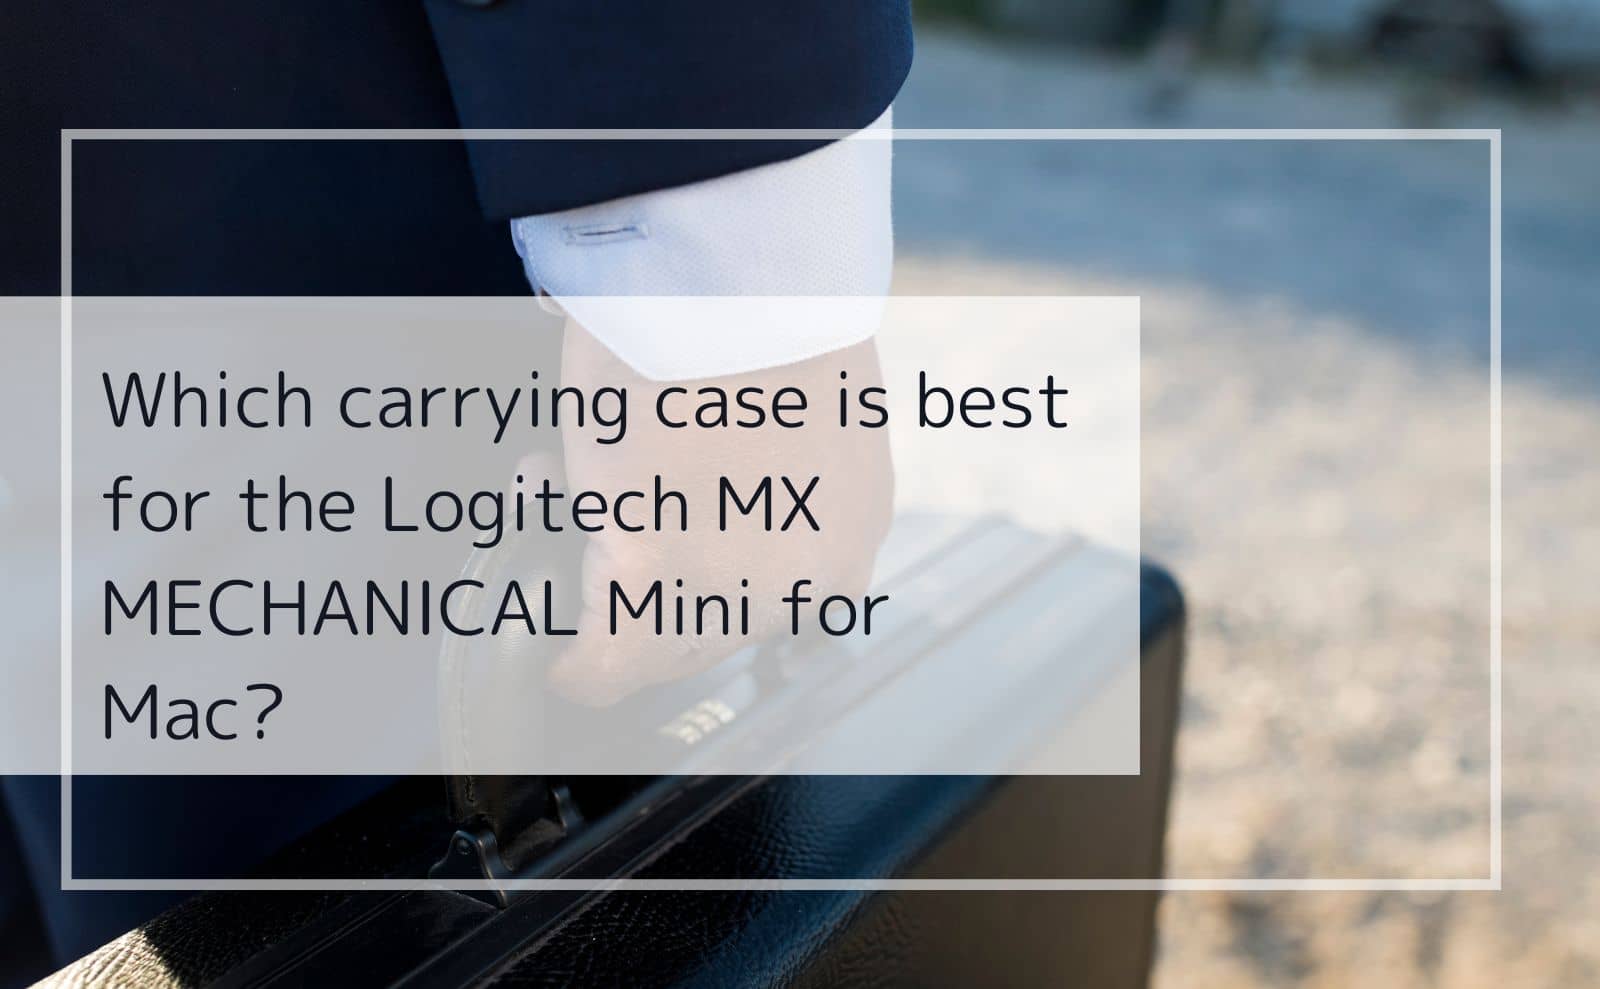 Which carrying case is best for carrying the Logitech MX